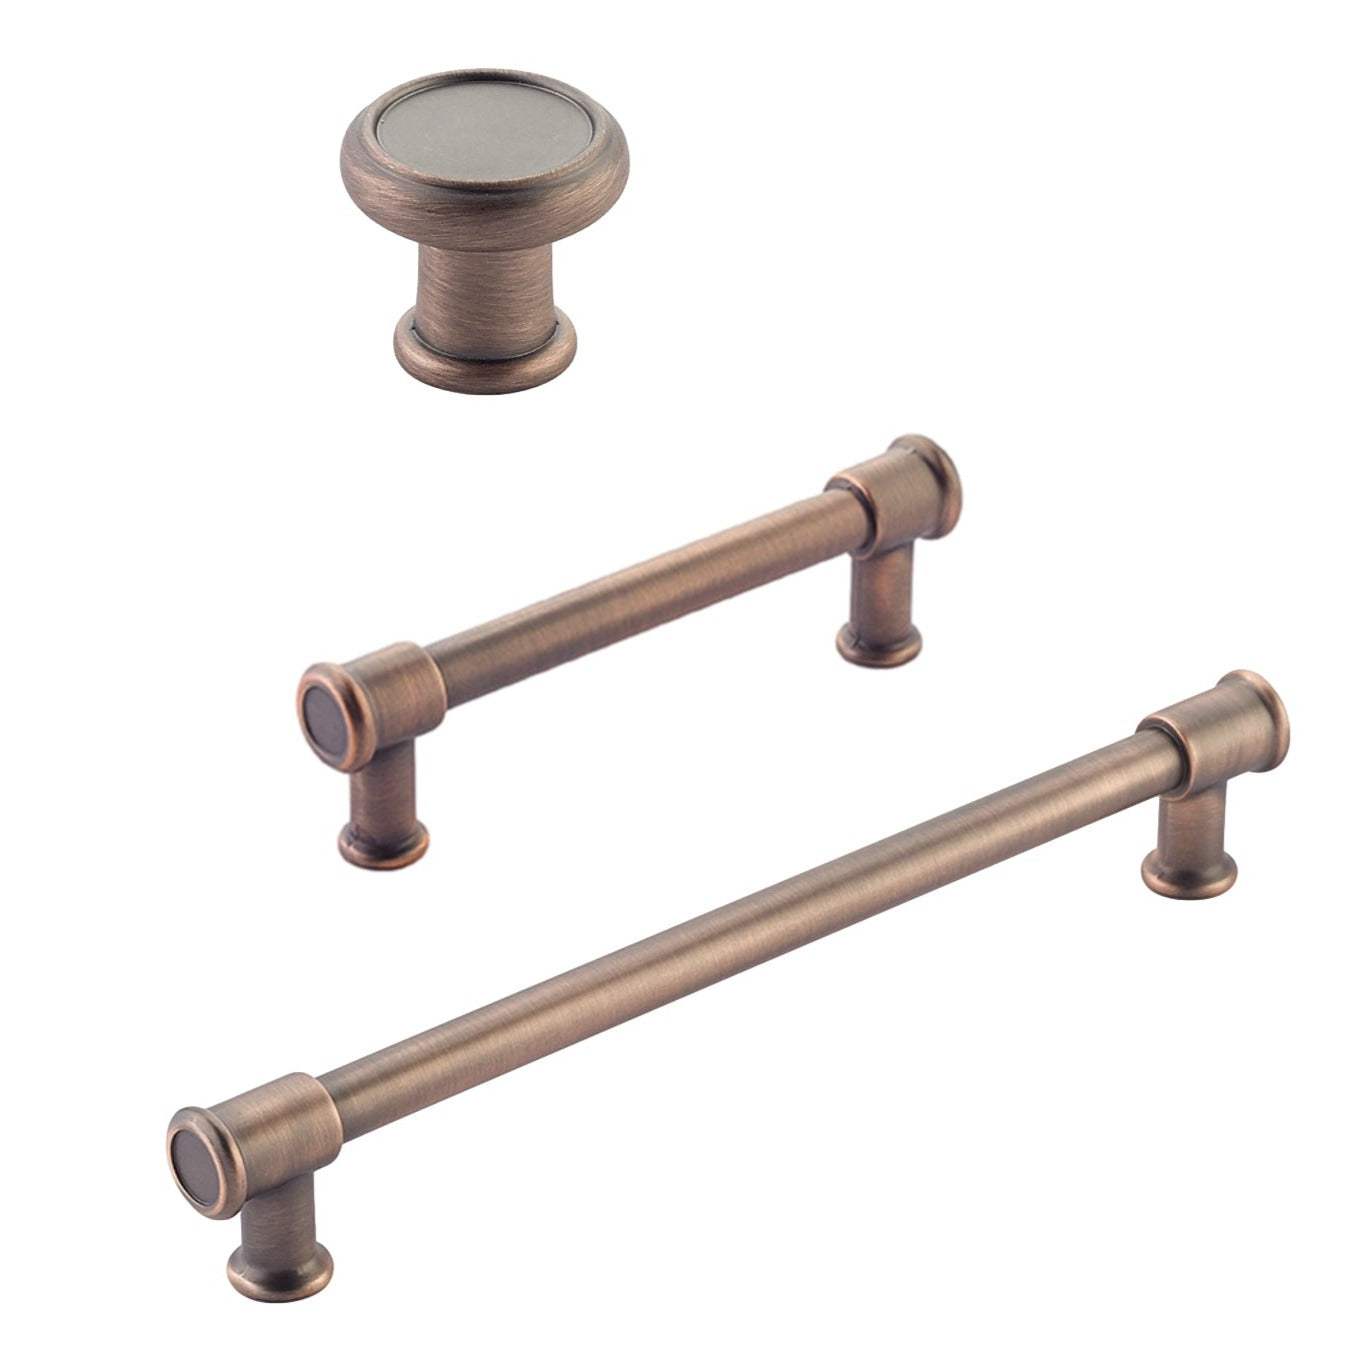 Antique Copper "Pipe" Cabinet Knob and Drawer Pulls